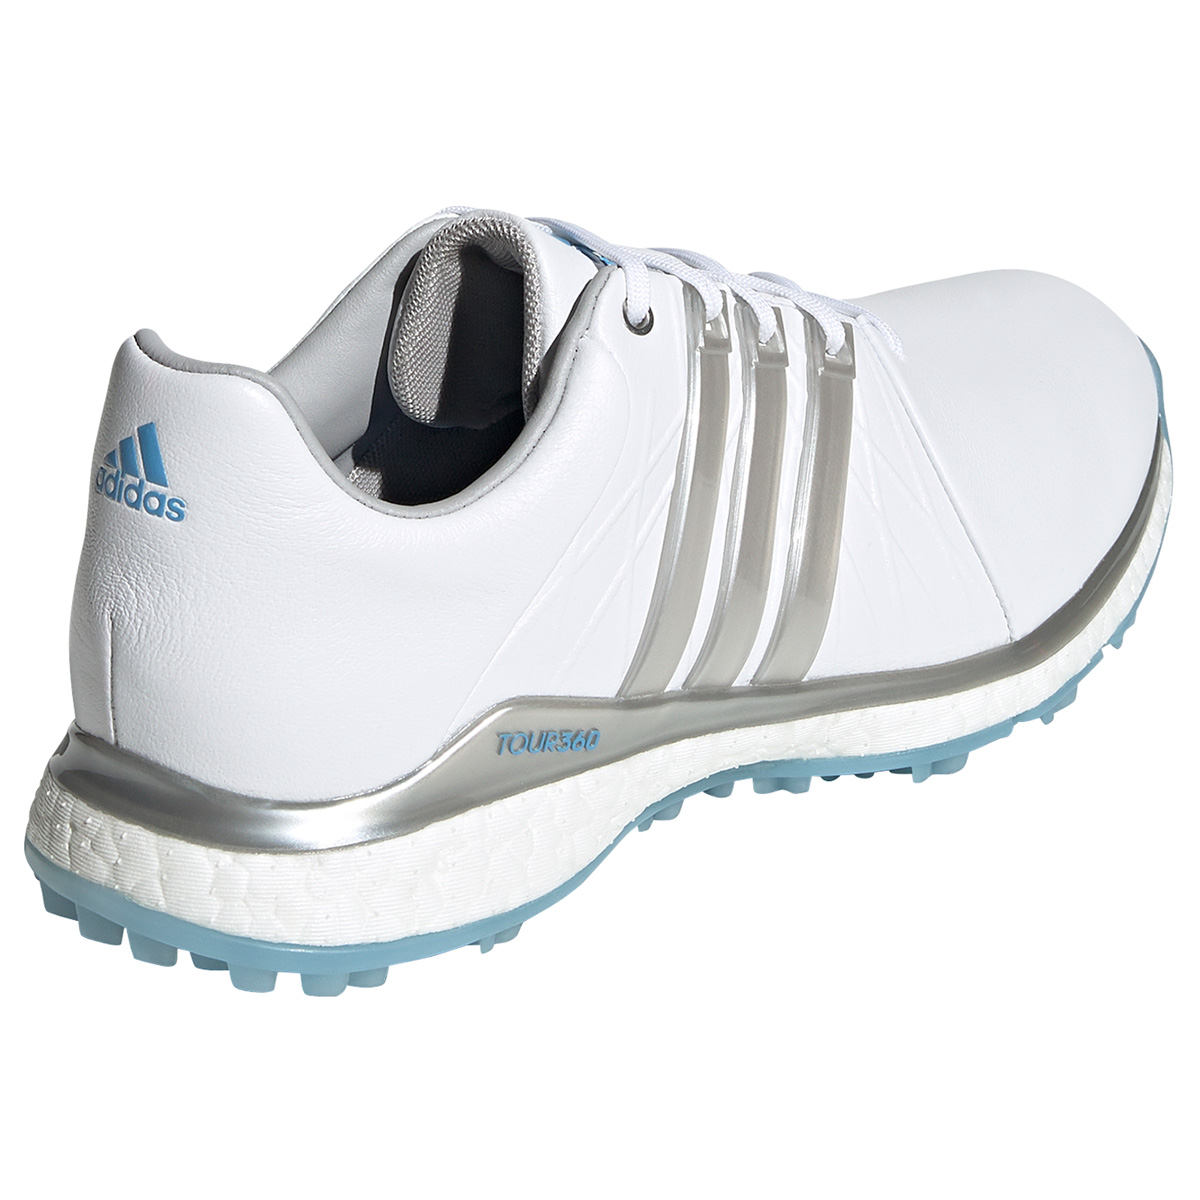 How to choose the best women's adidas tour 360 golf shoes?